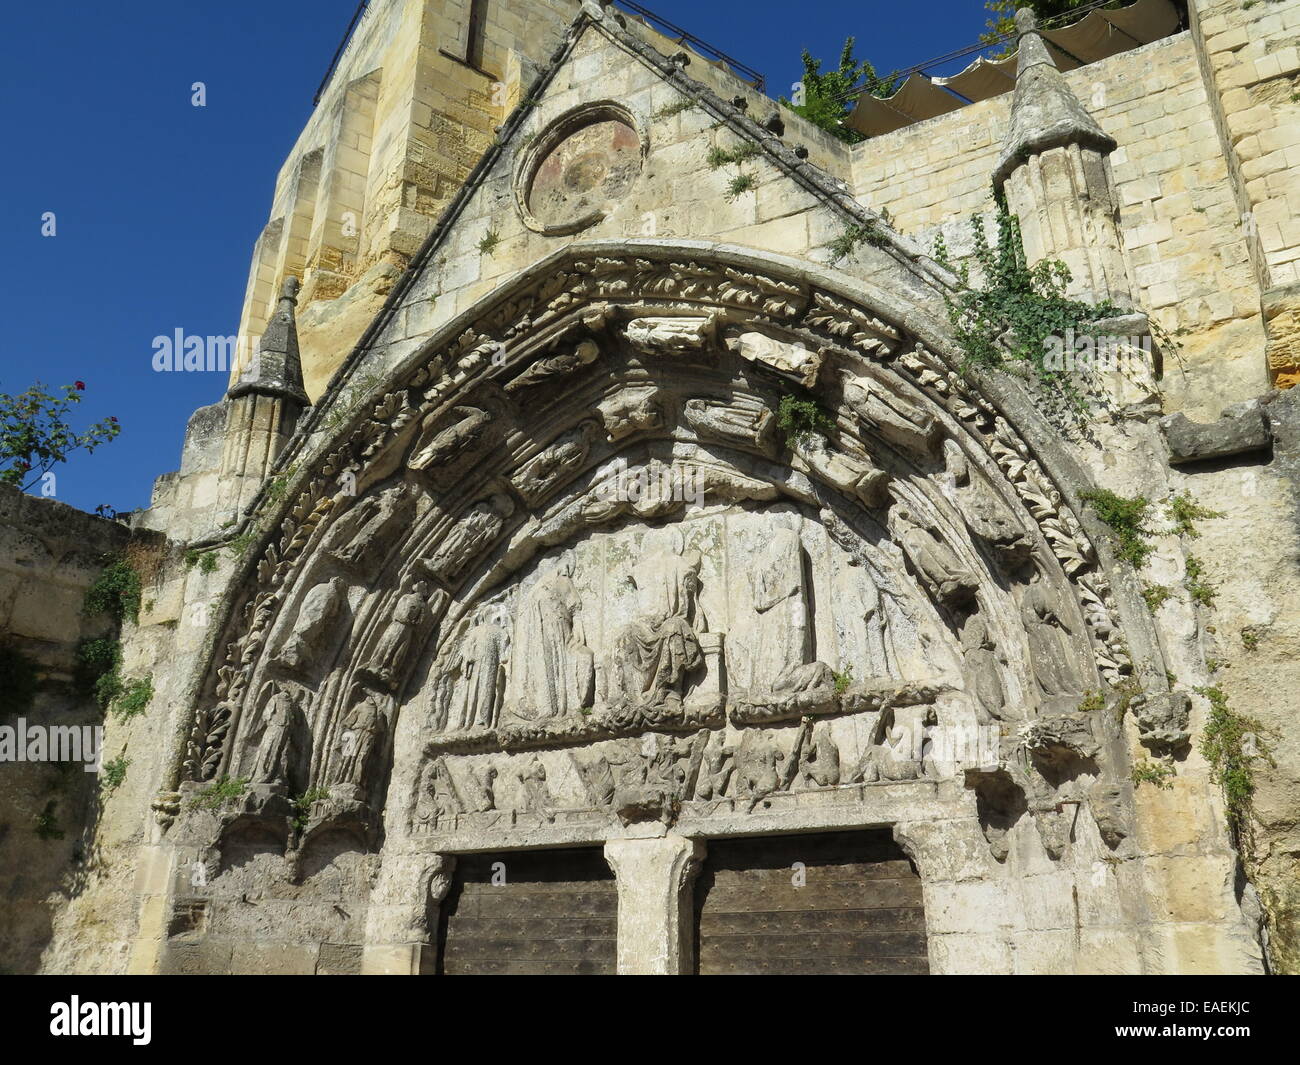 The Monolithic Church archway at St Emilion, Bordeaux, France Stock Photo